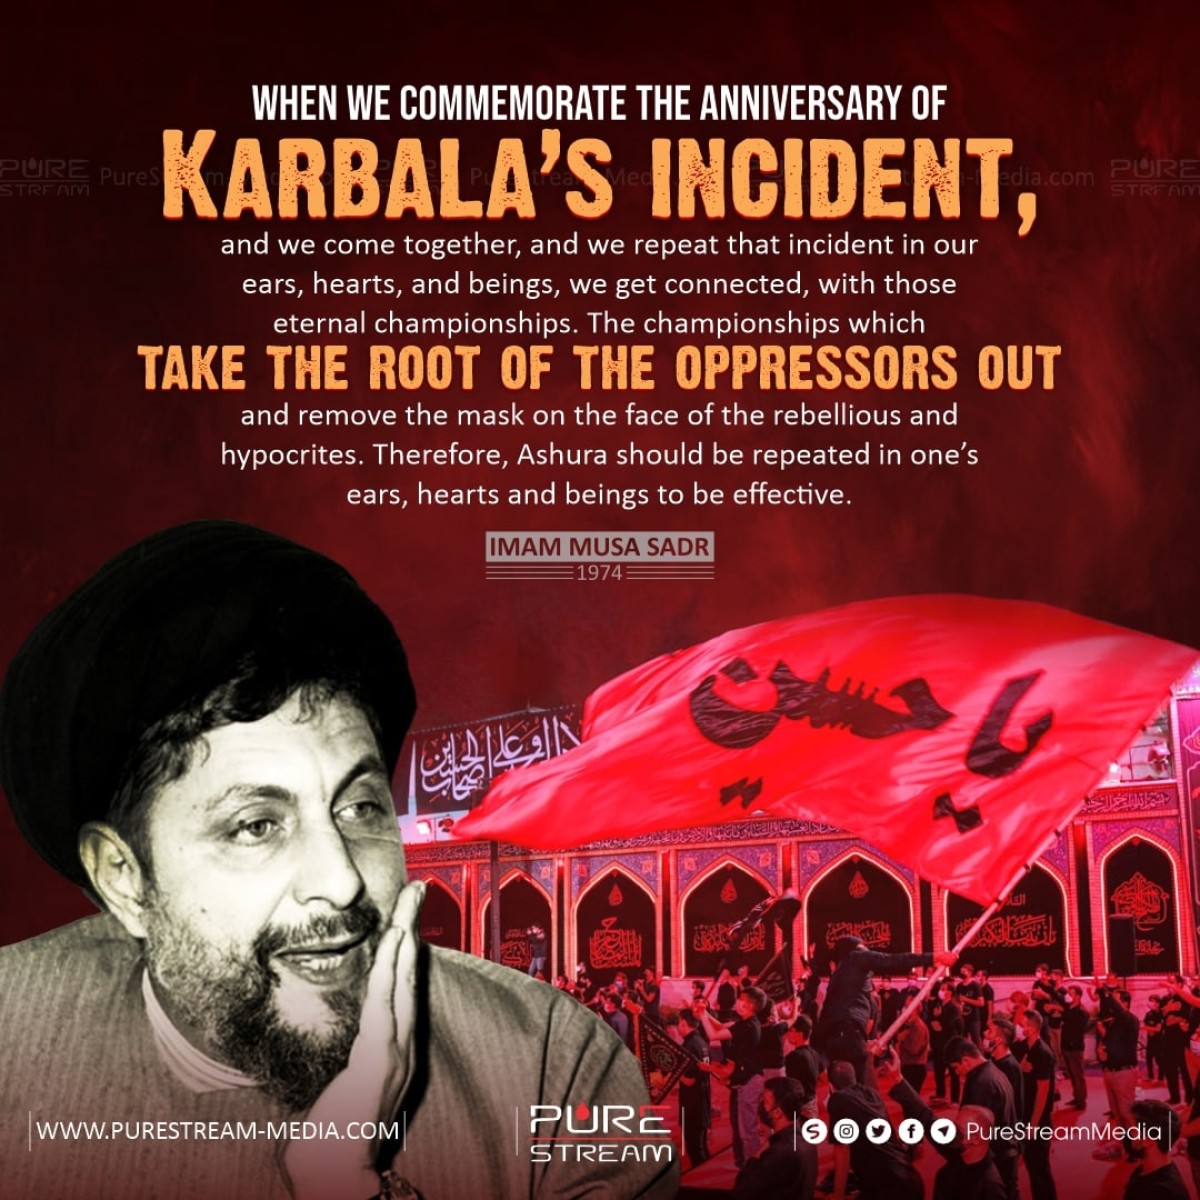 When we commemorate the anniversary of Karbala’s incident